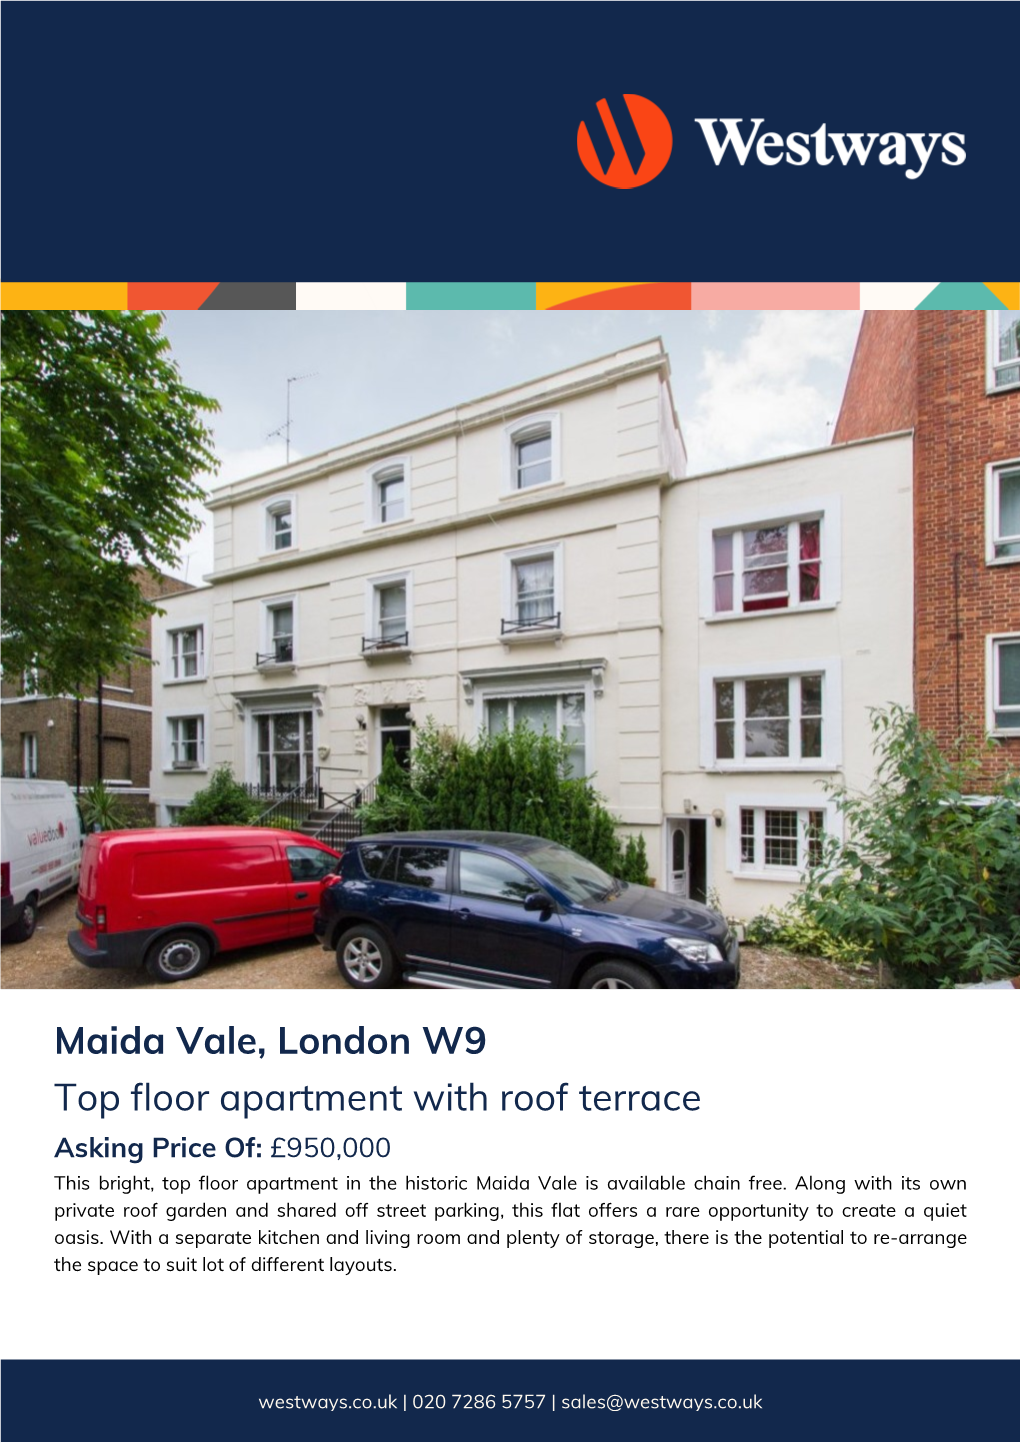 Maida Vale, London W9 Top Floor Apartment with Roof Terrace